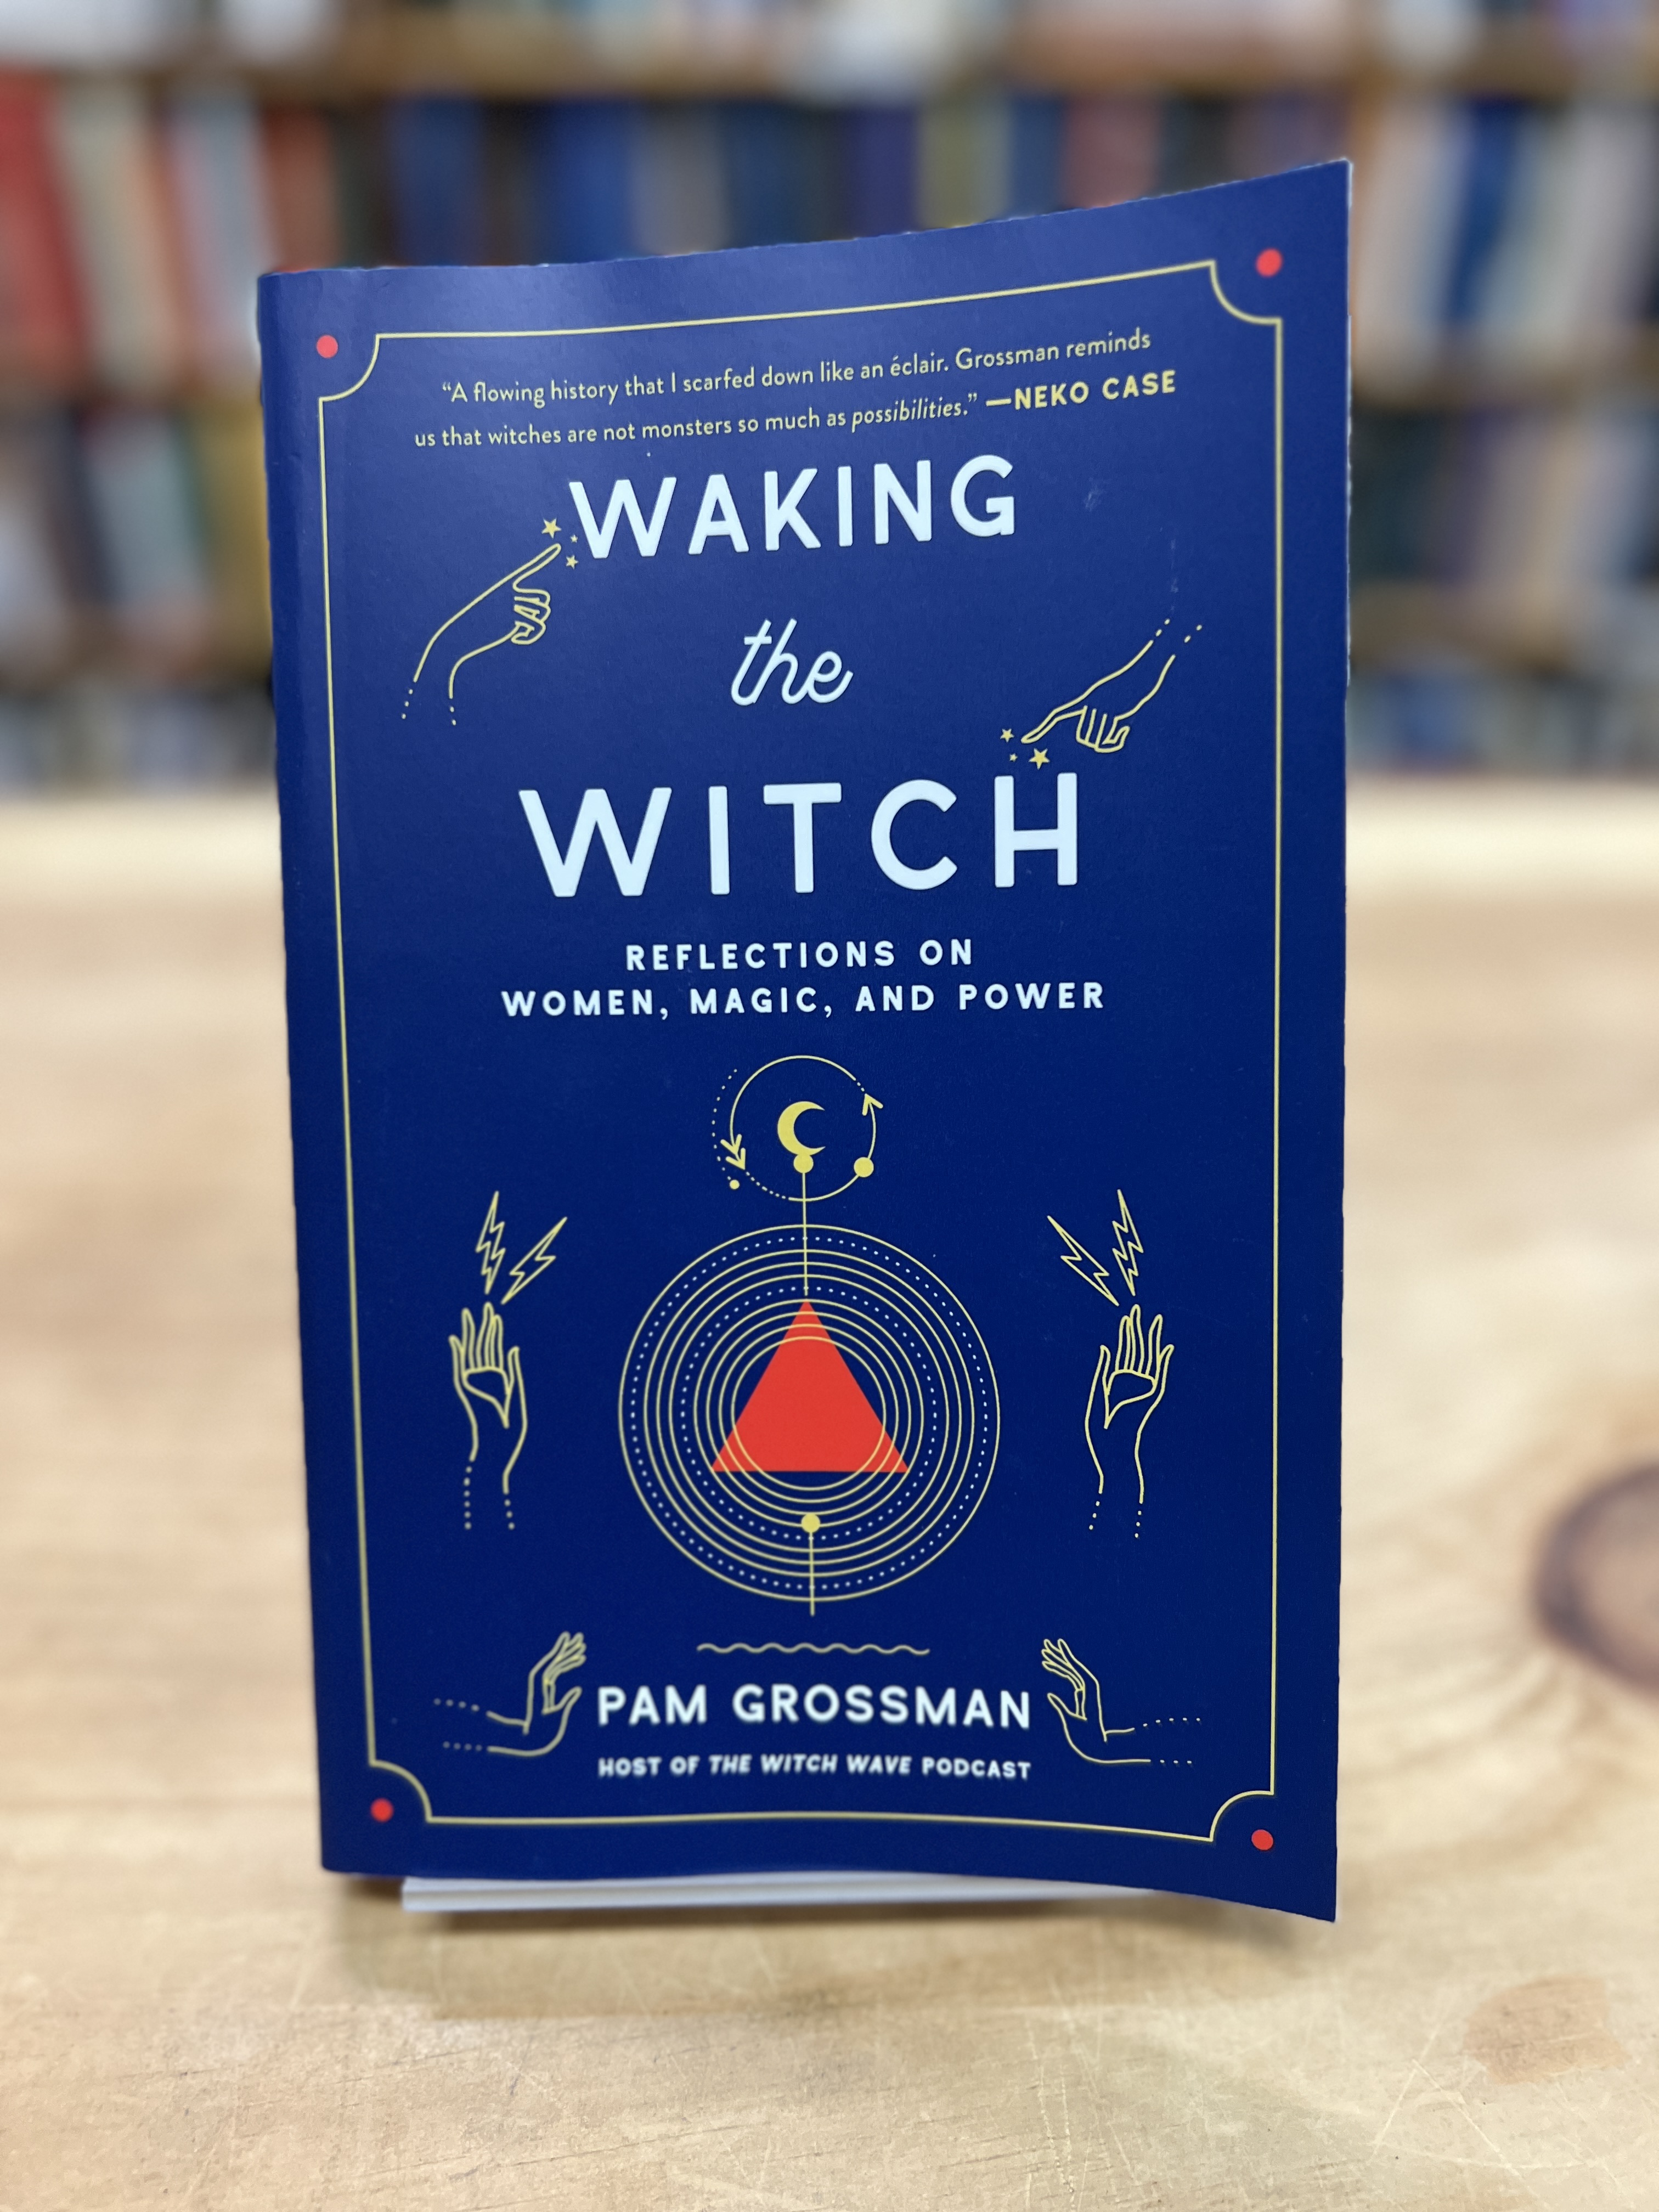 Image for "Waking the Witch, Reflections on Woman, Magic, and Power."